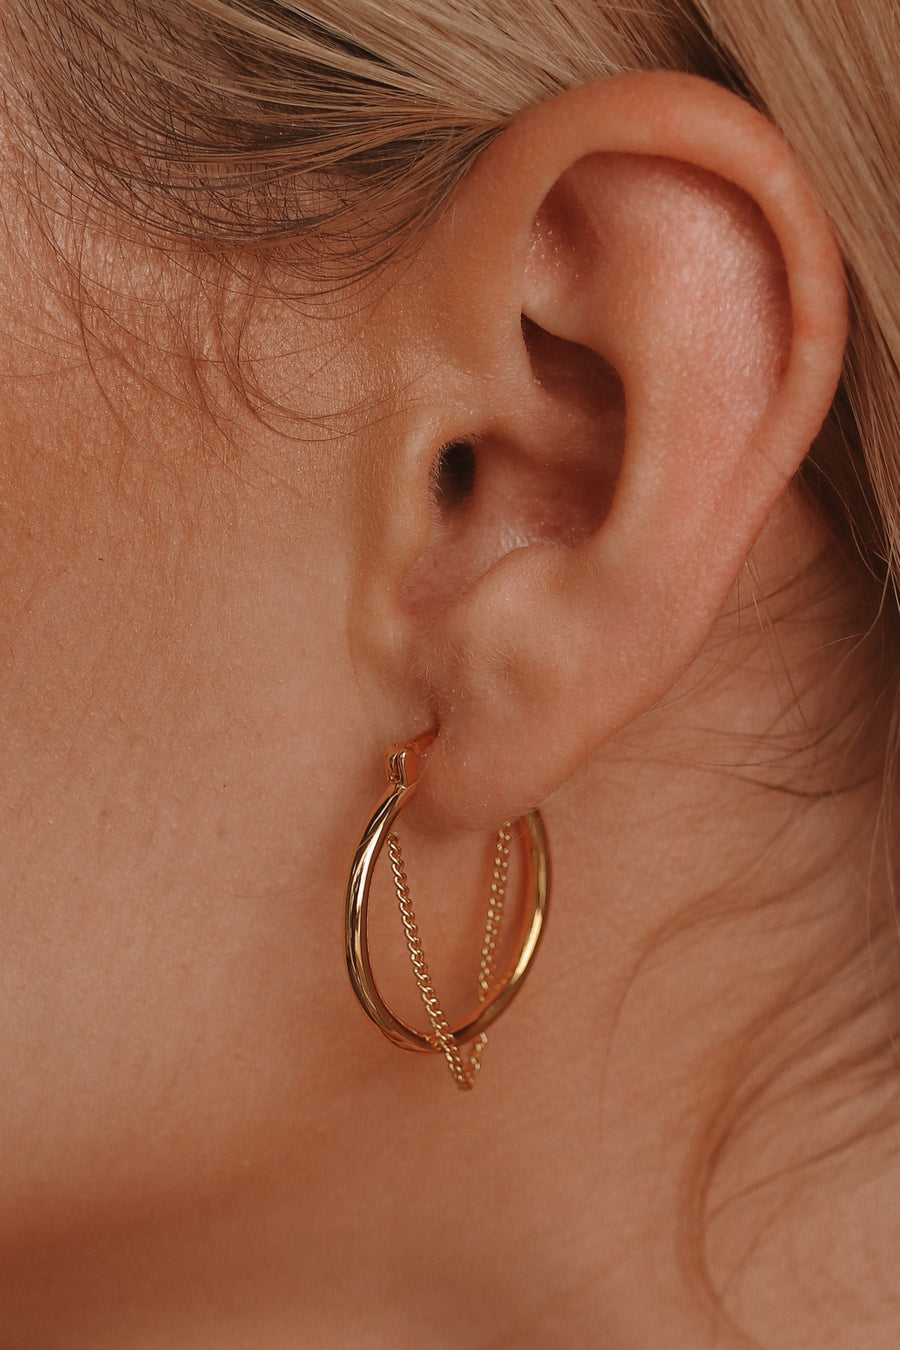 Mercedes - Gold Infused or Silver Stainless Steel Hoops